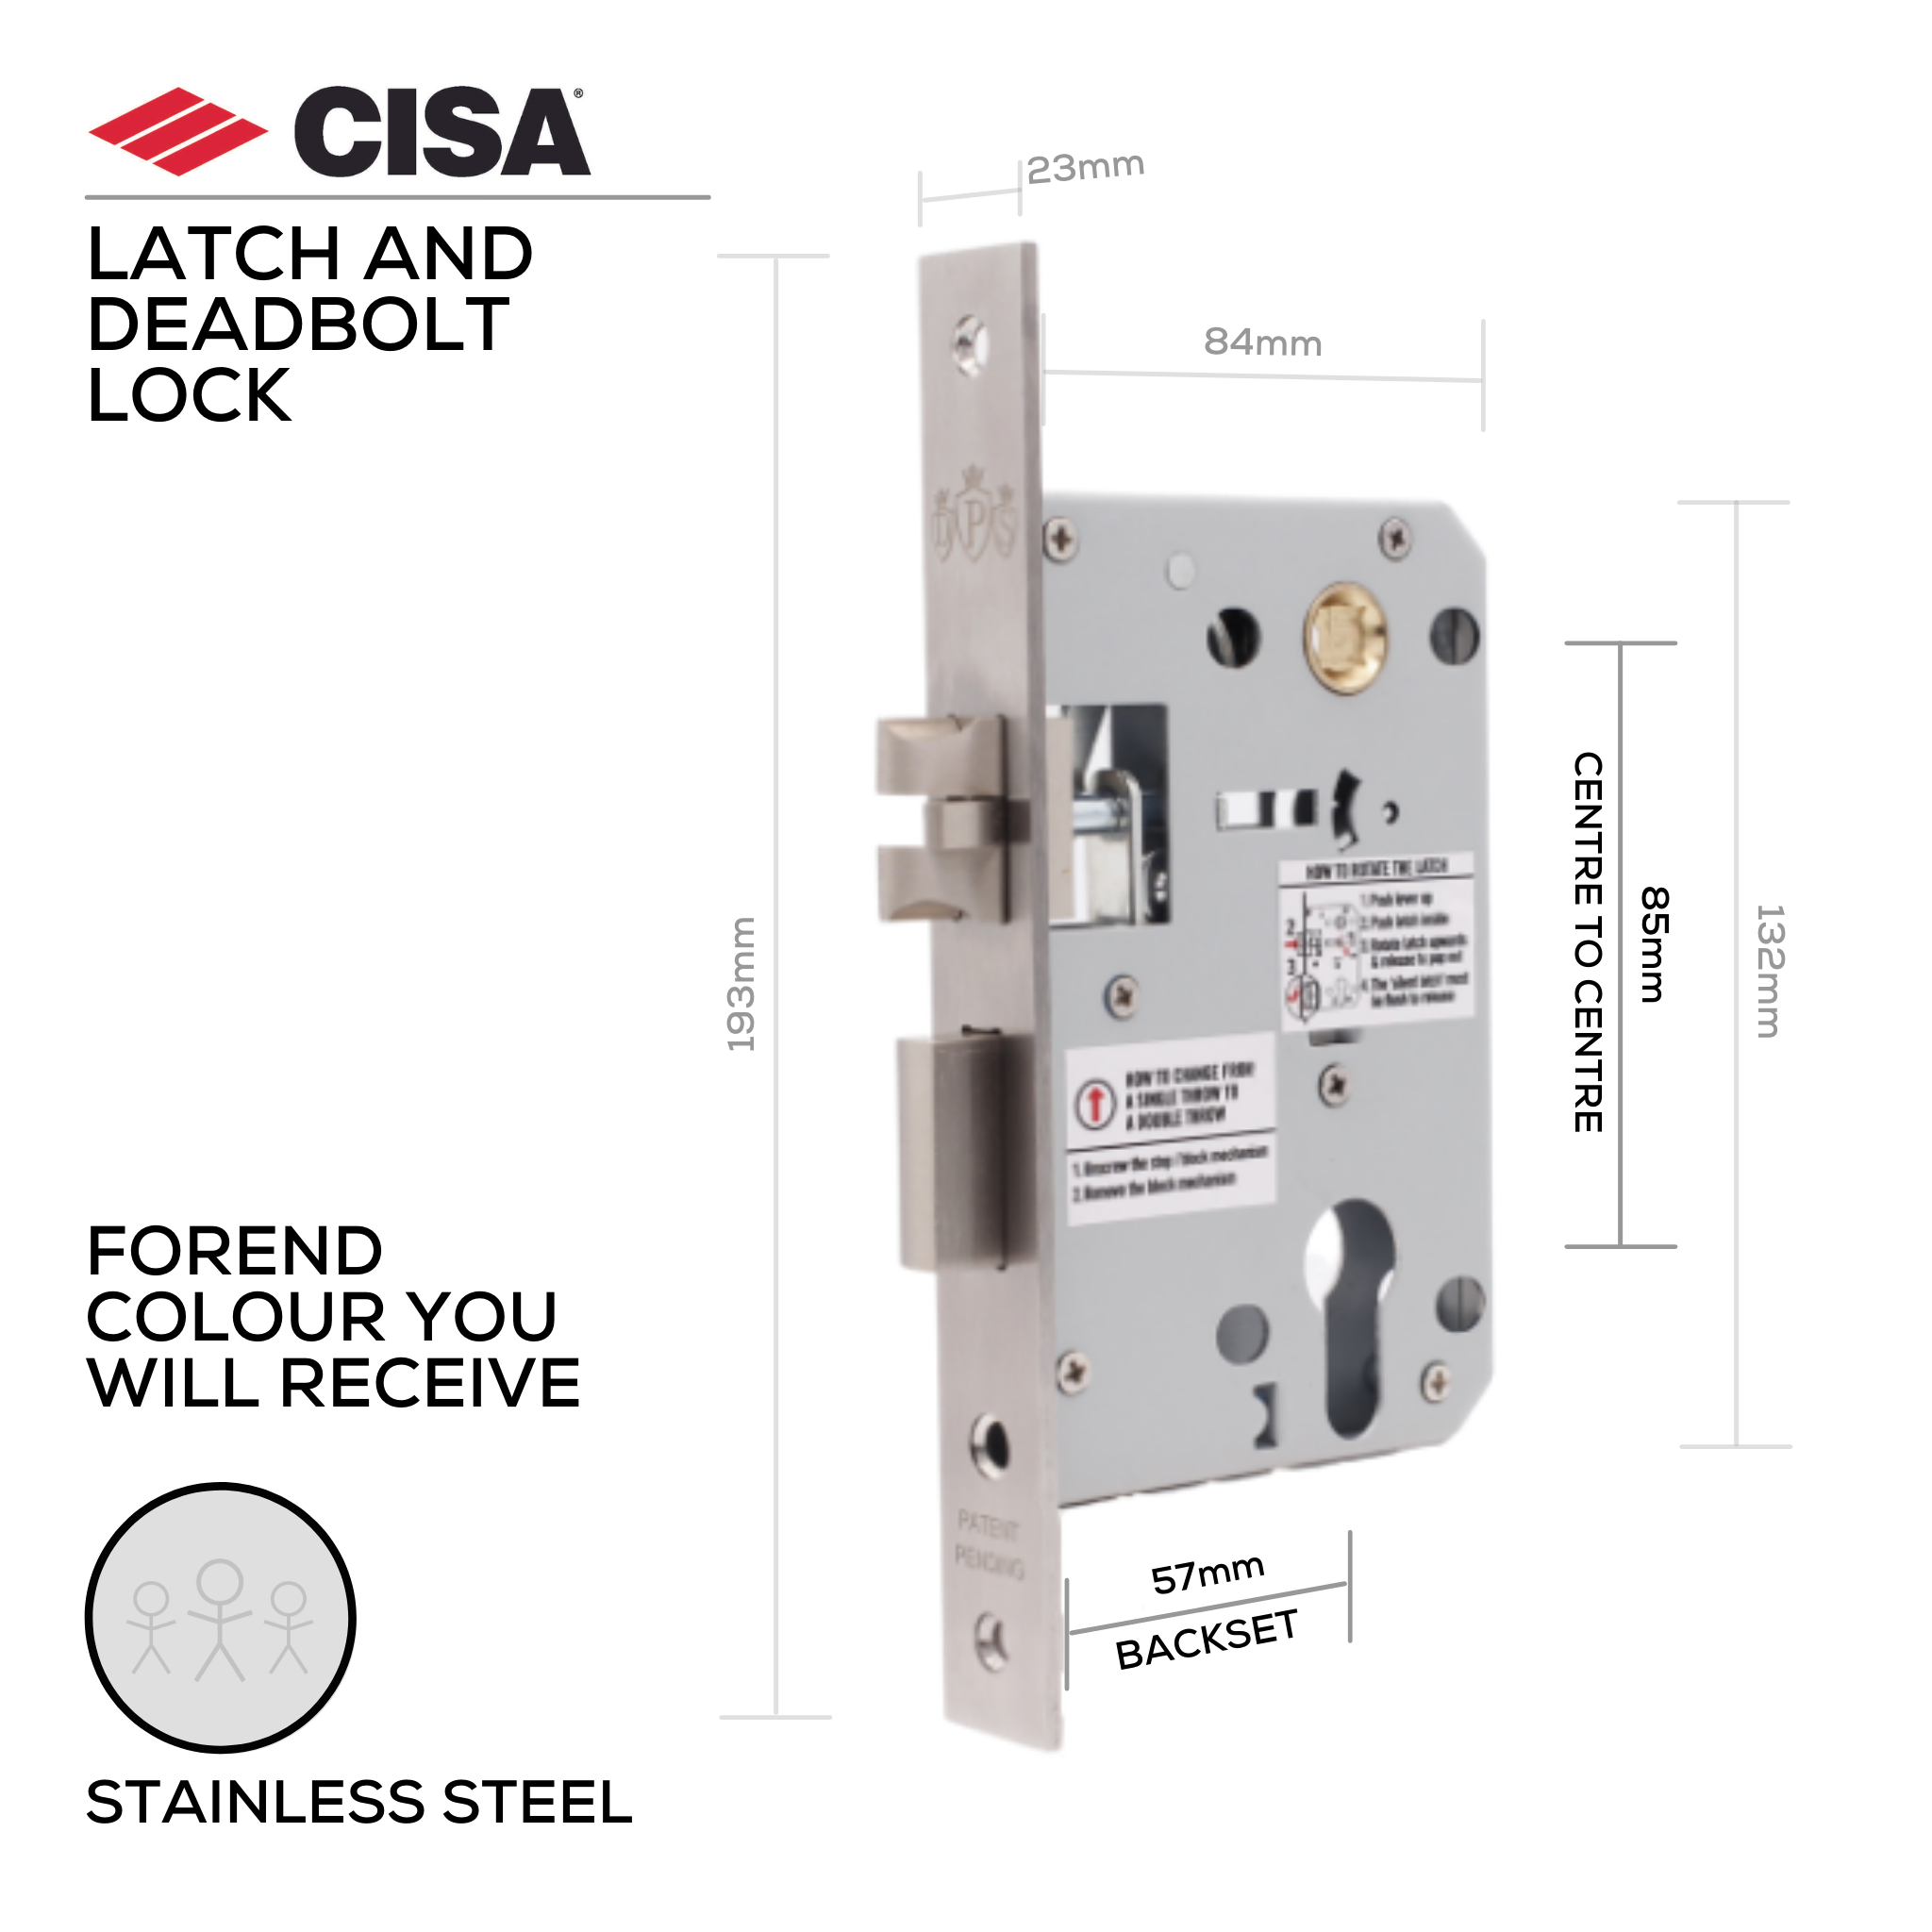 DPS85-57-SS-W, Latch & Deadbolt Lock, Euro Cylinder, Excluding Cylinder, 57mm (Backset), 85mm (ctc), Stainless Steel, CISA